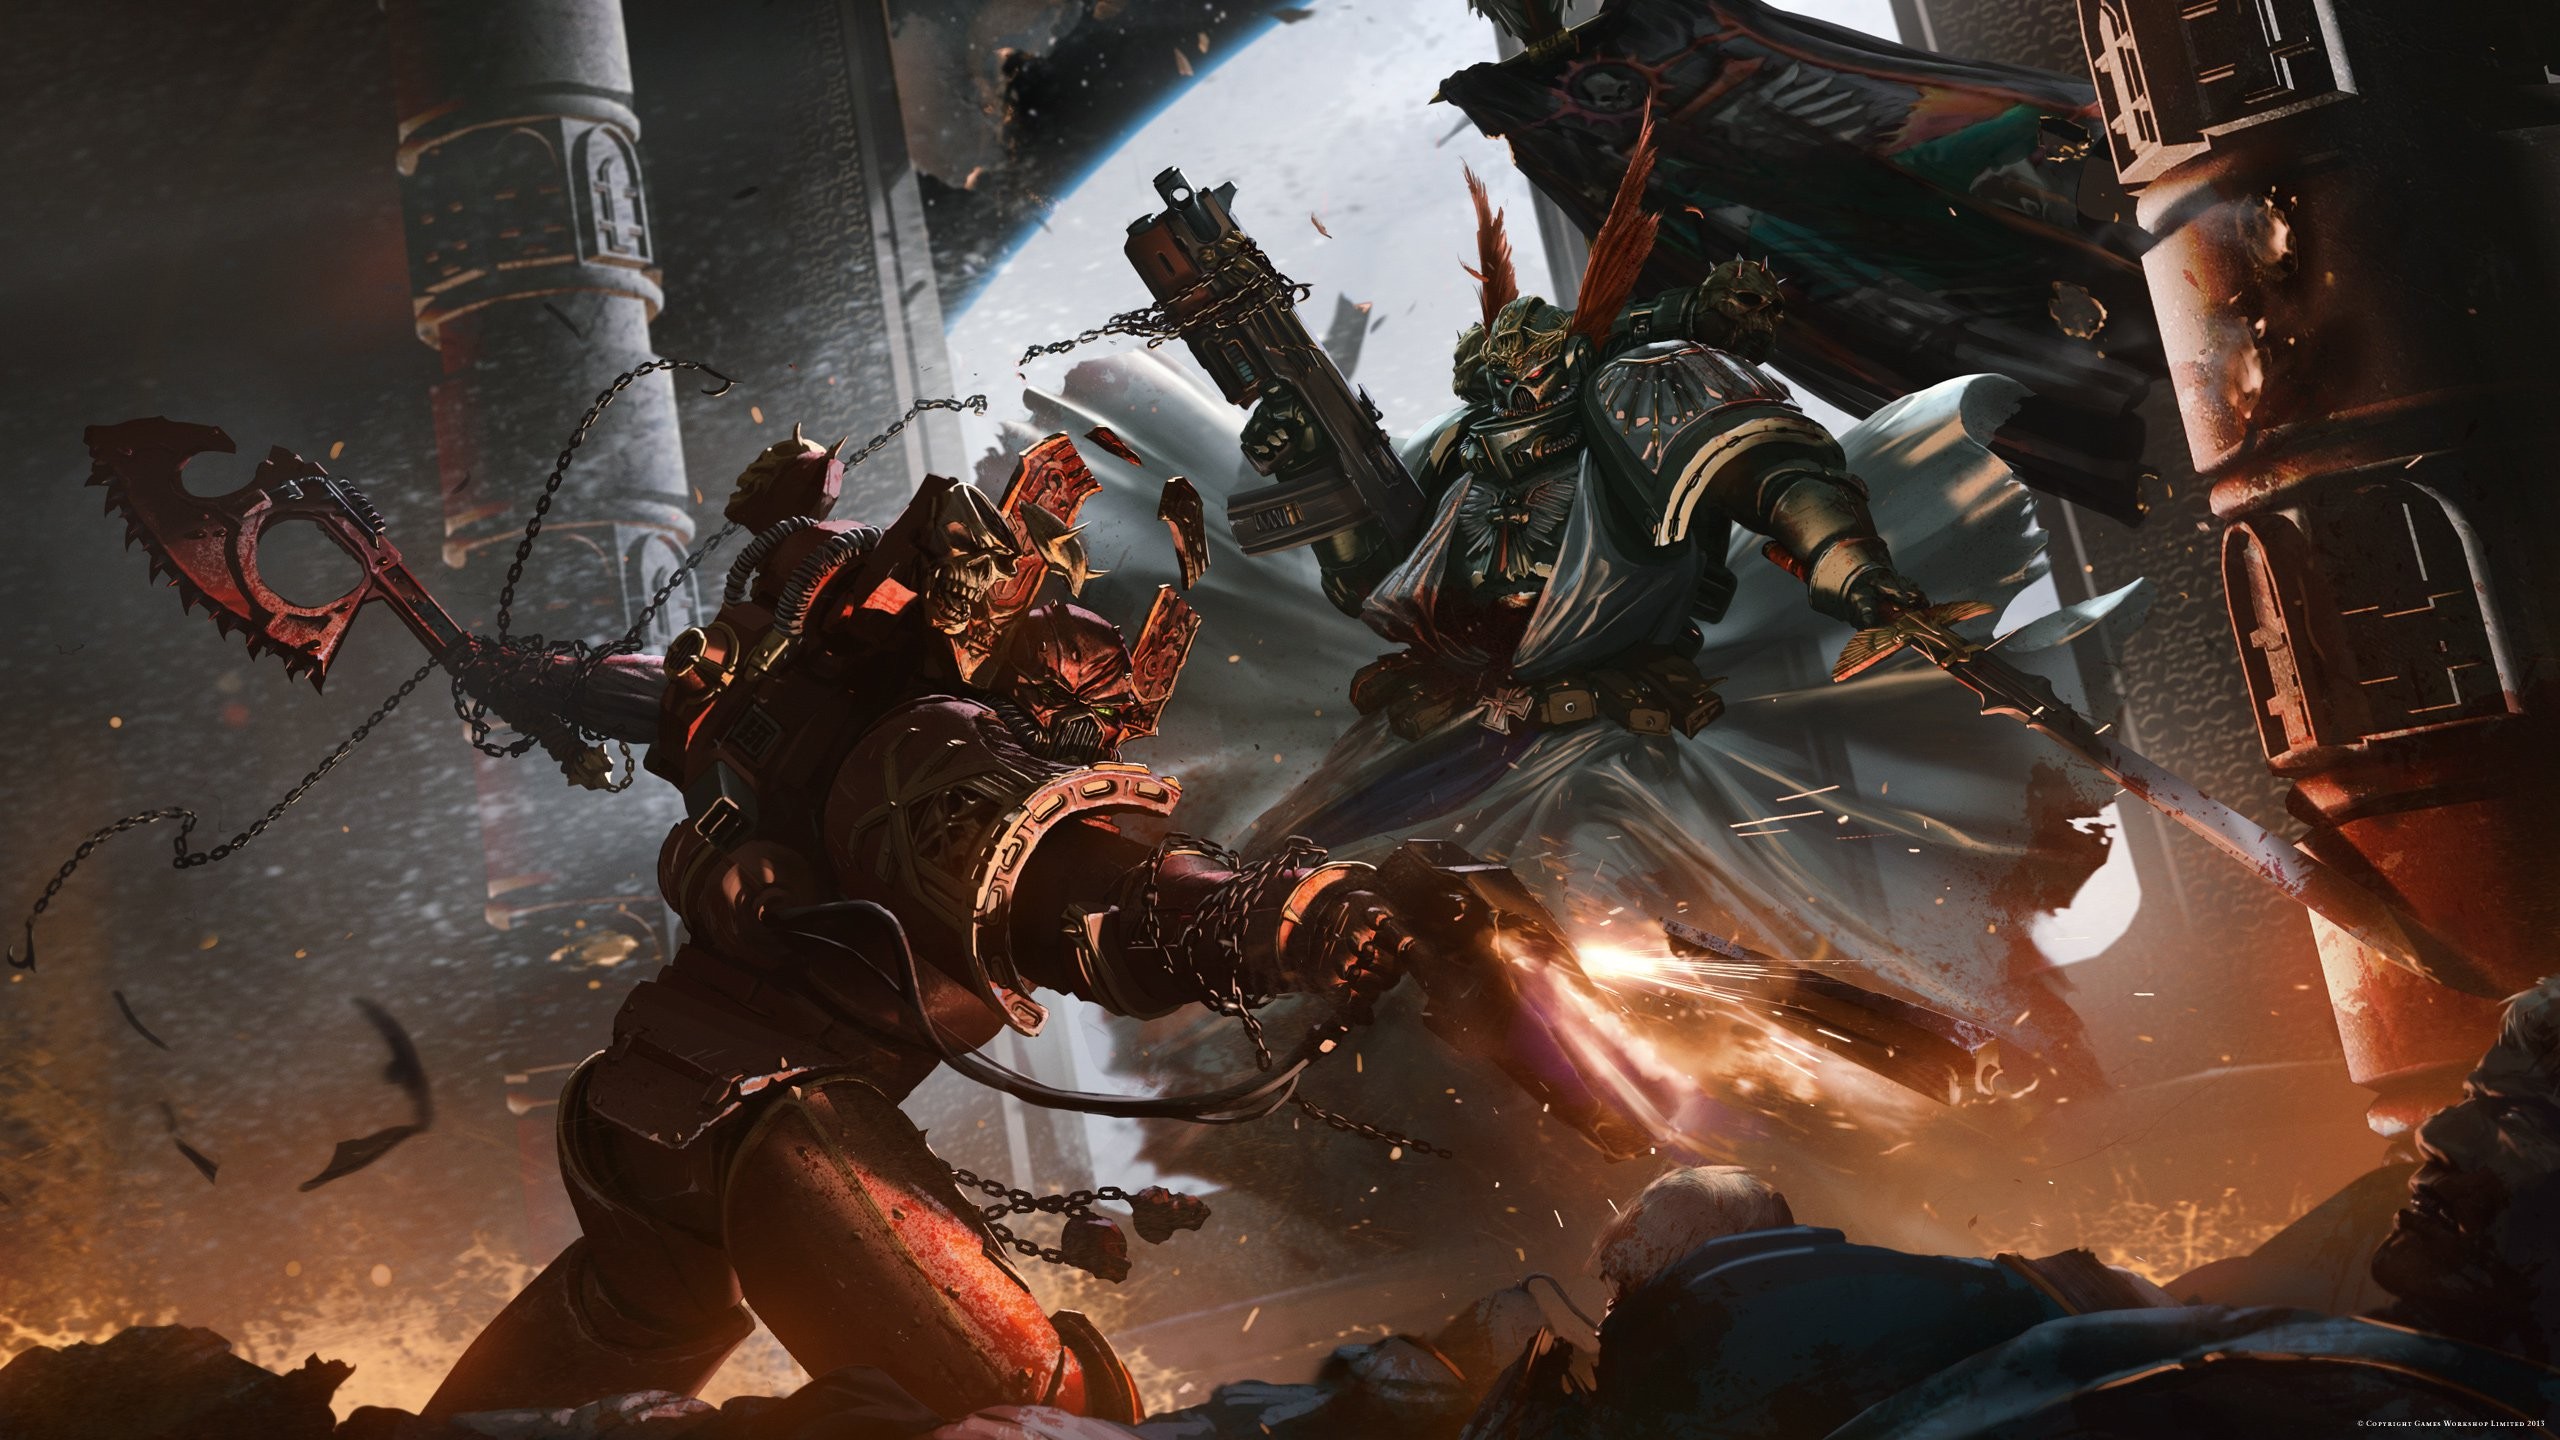 General 2560x1440 Warhammer 40,000 fighting Chaos Space Marine space marines video games PC gaming